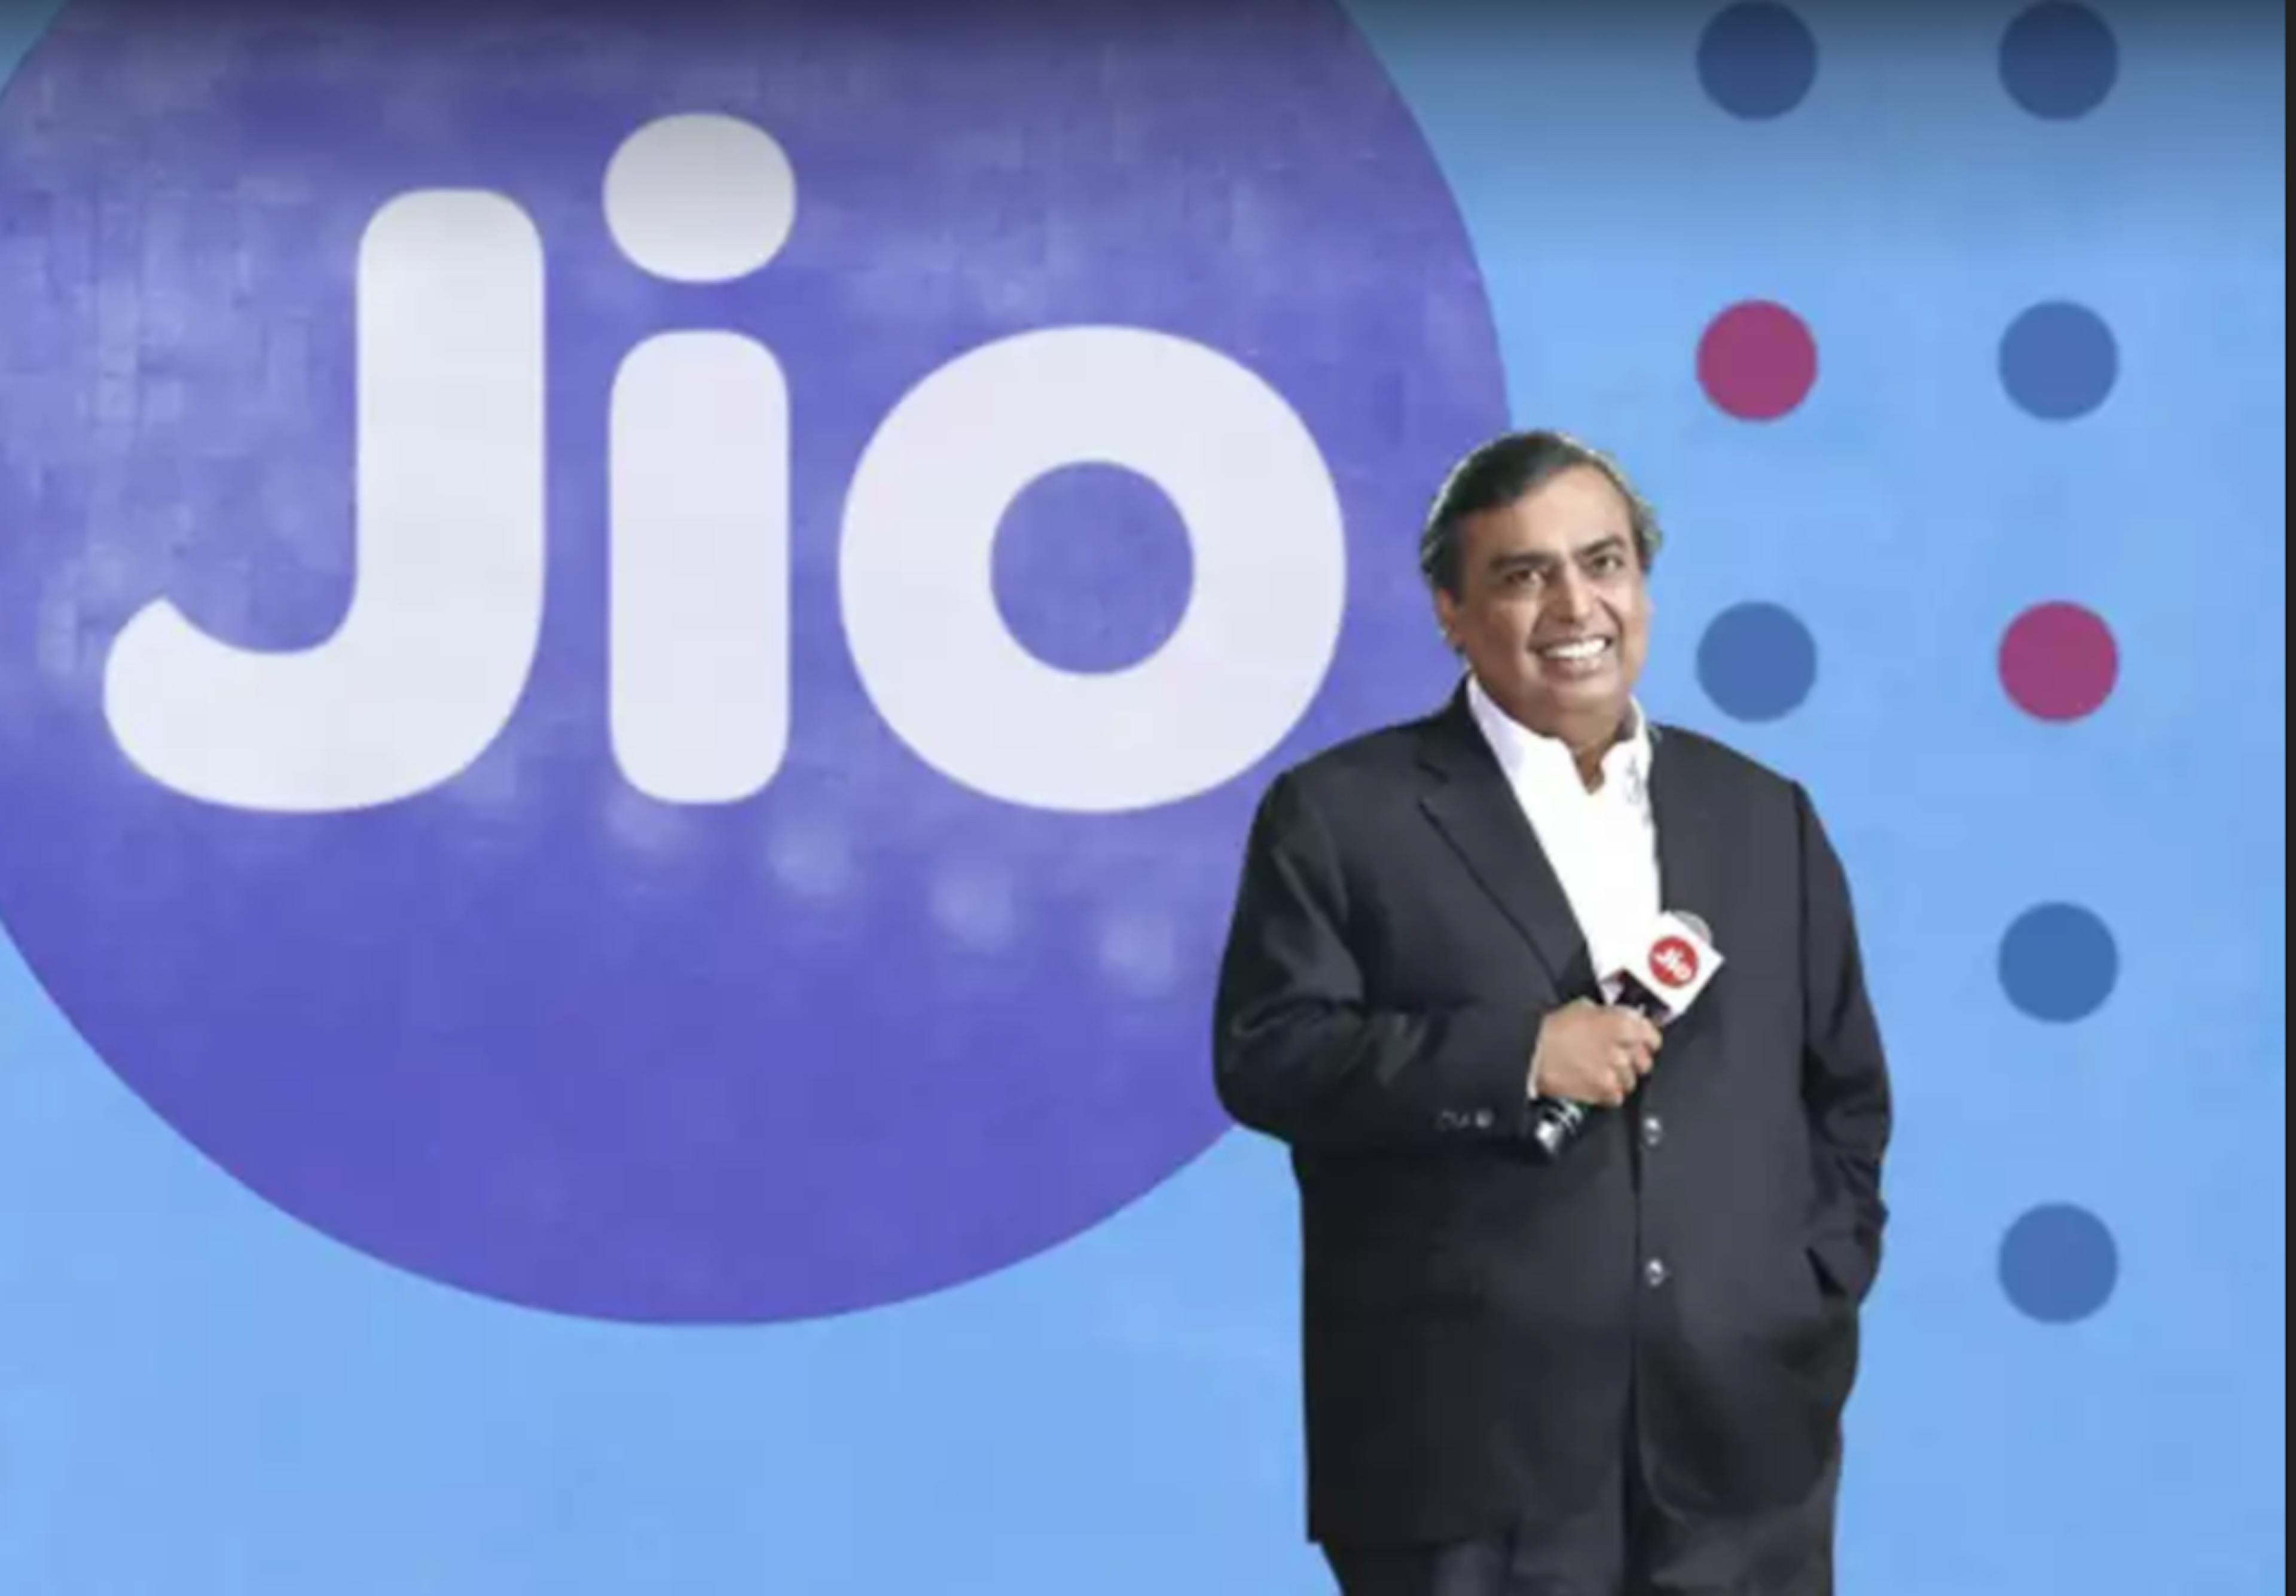 /why-reliance-jio-will-crush-all-ad-networks-e5577d3a77ec feature image